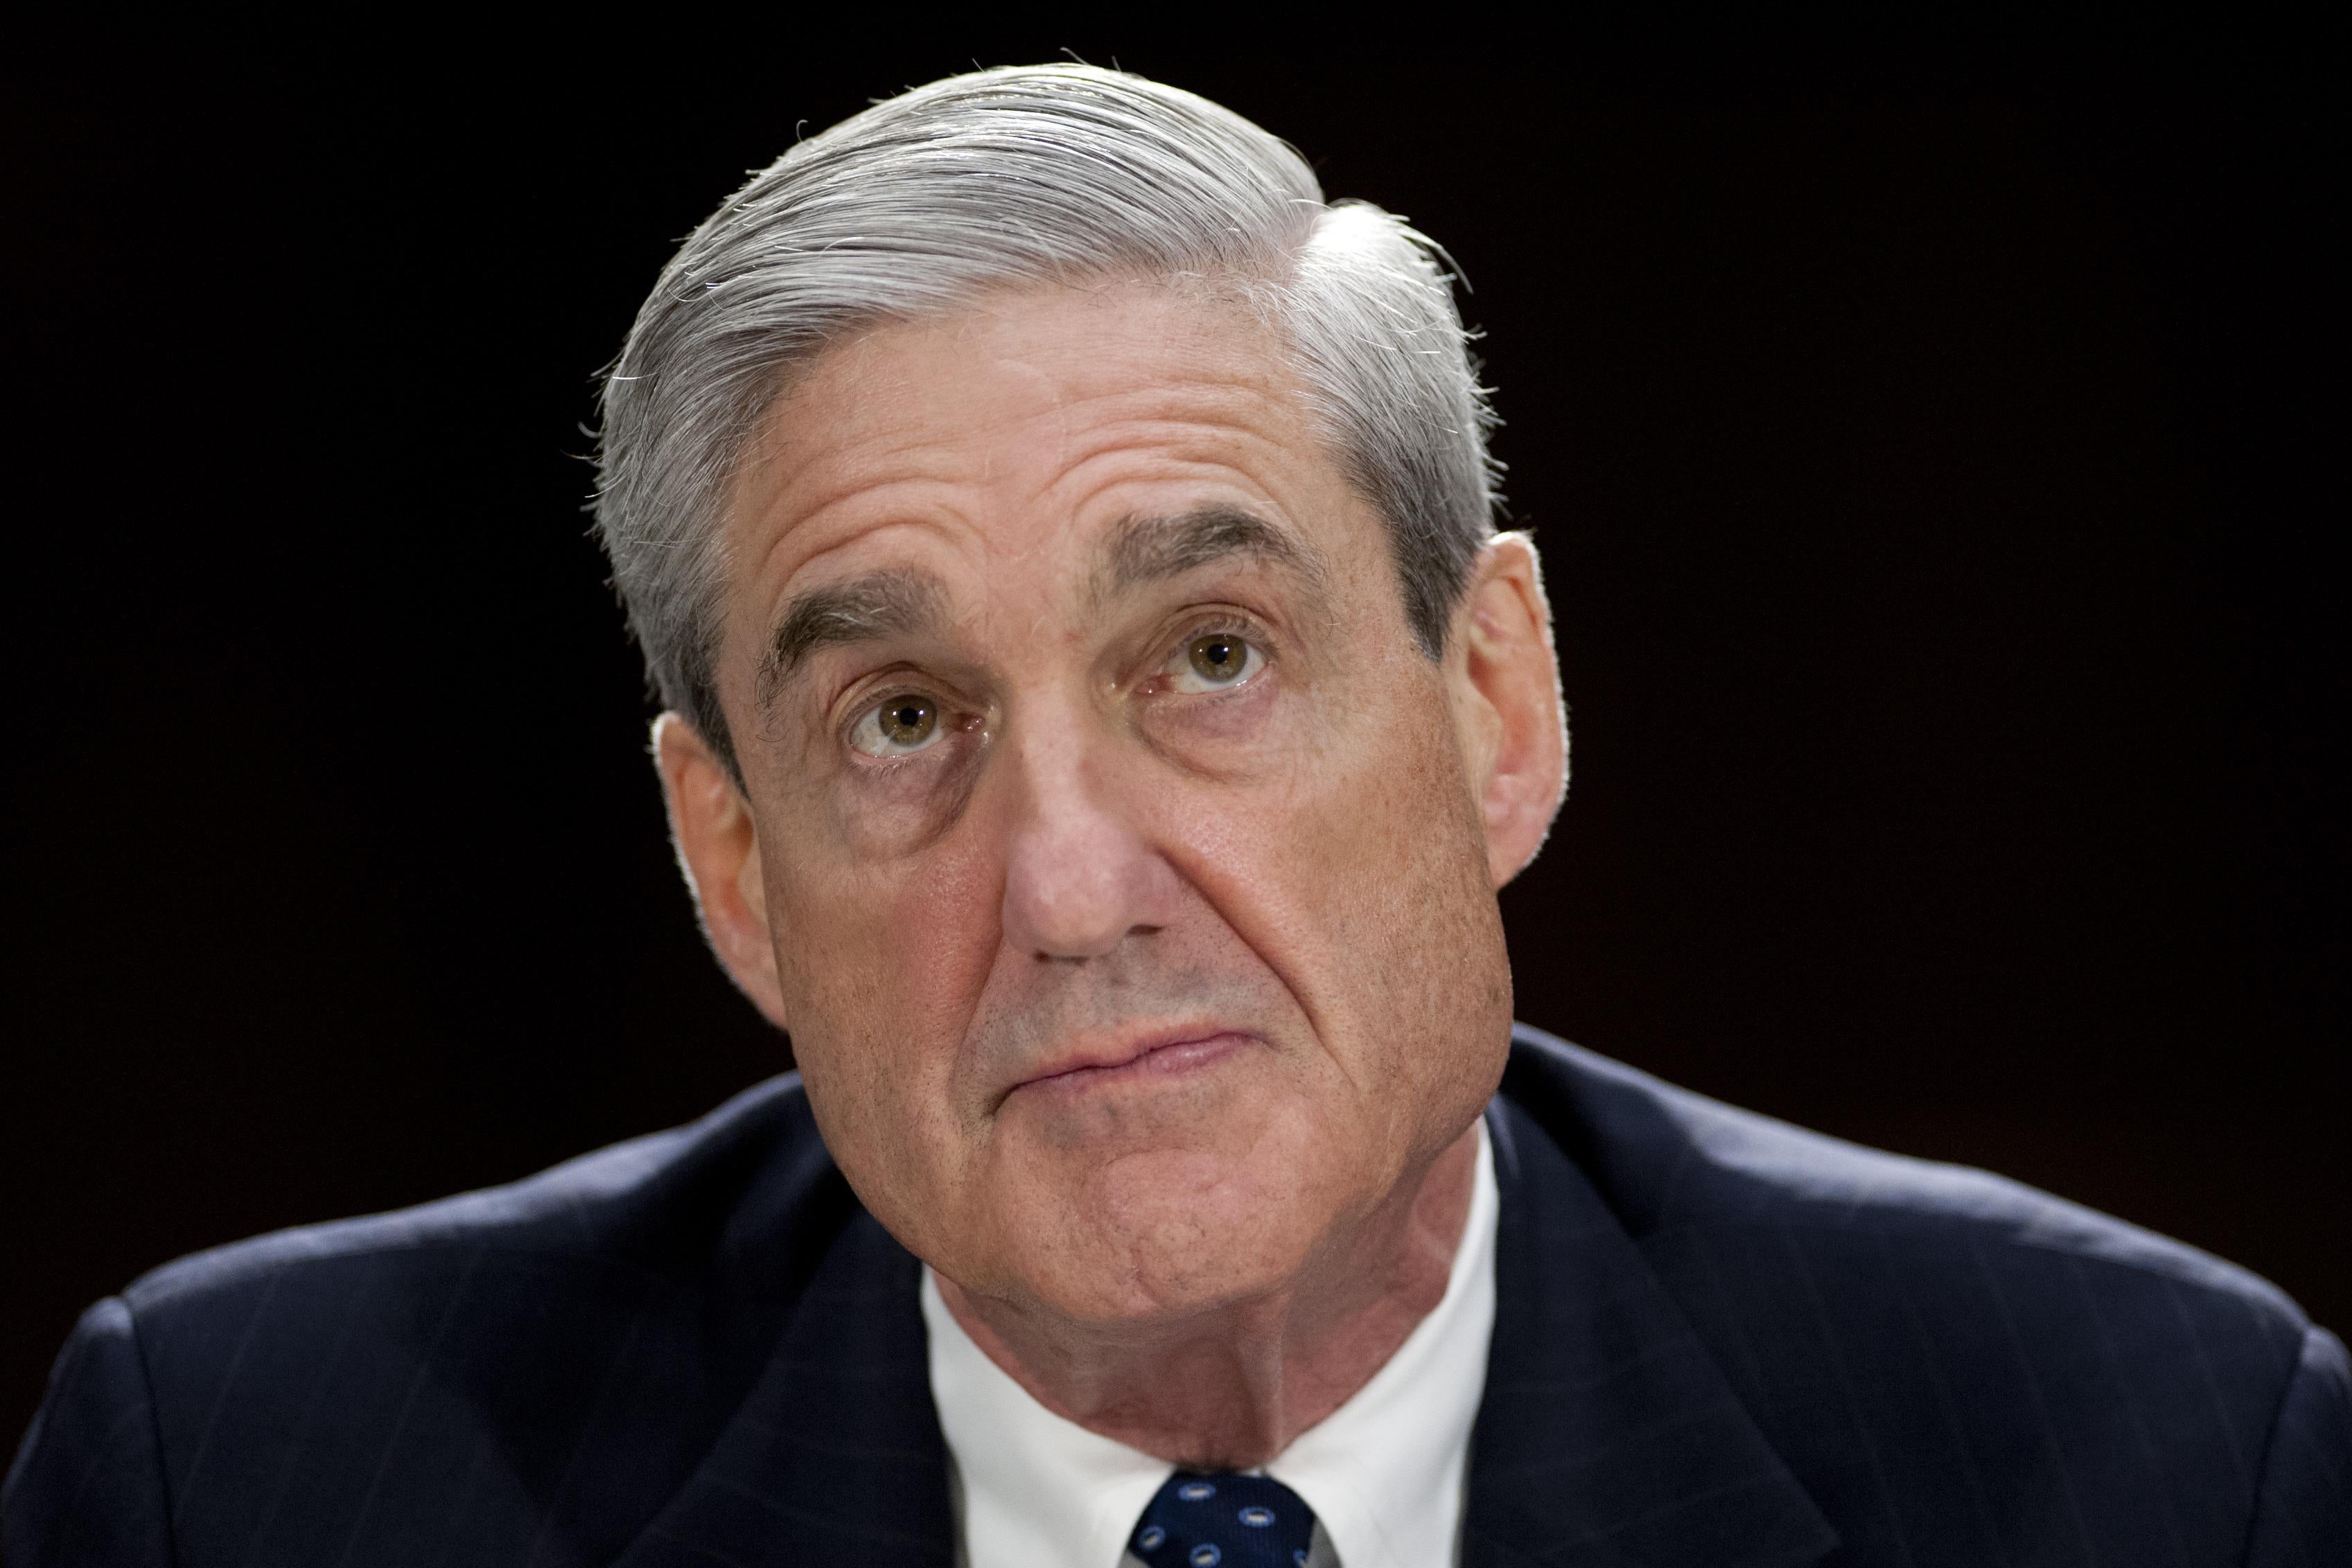 Mueller, in front of a background of black, looks upward.